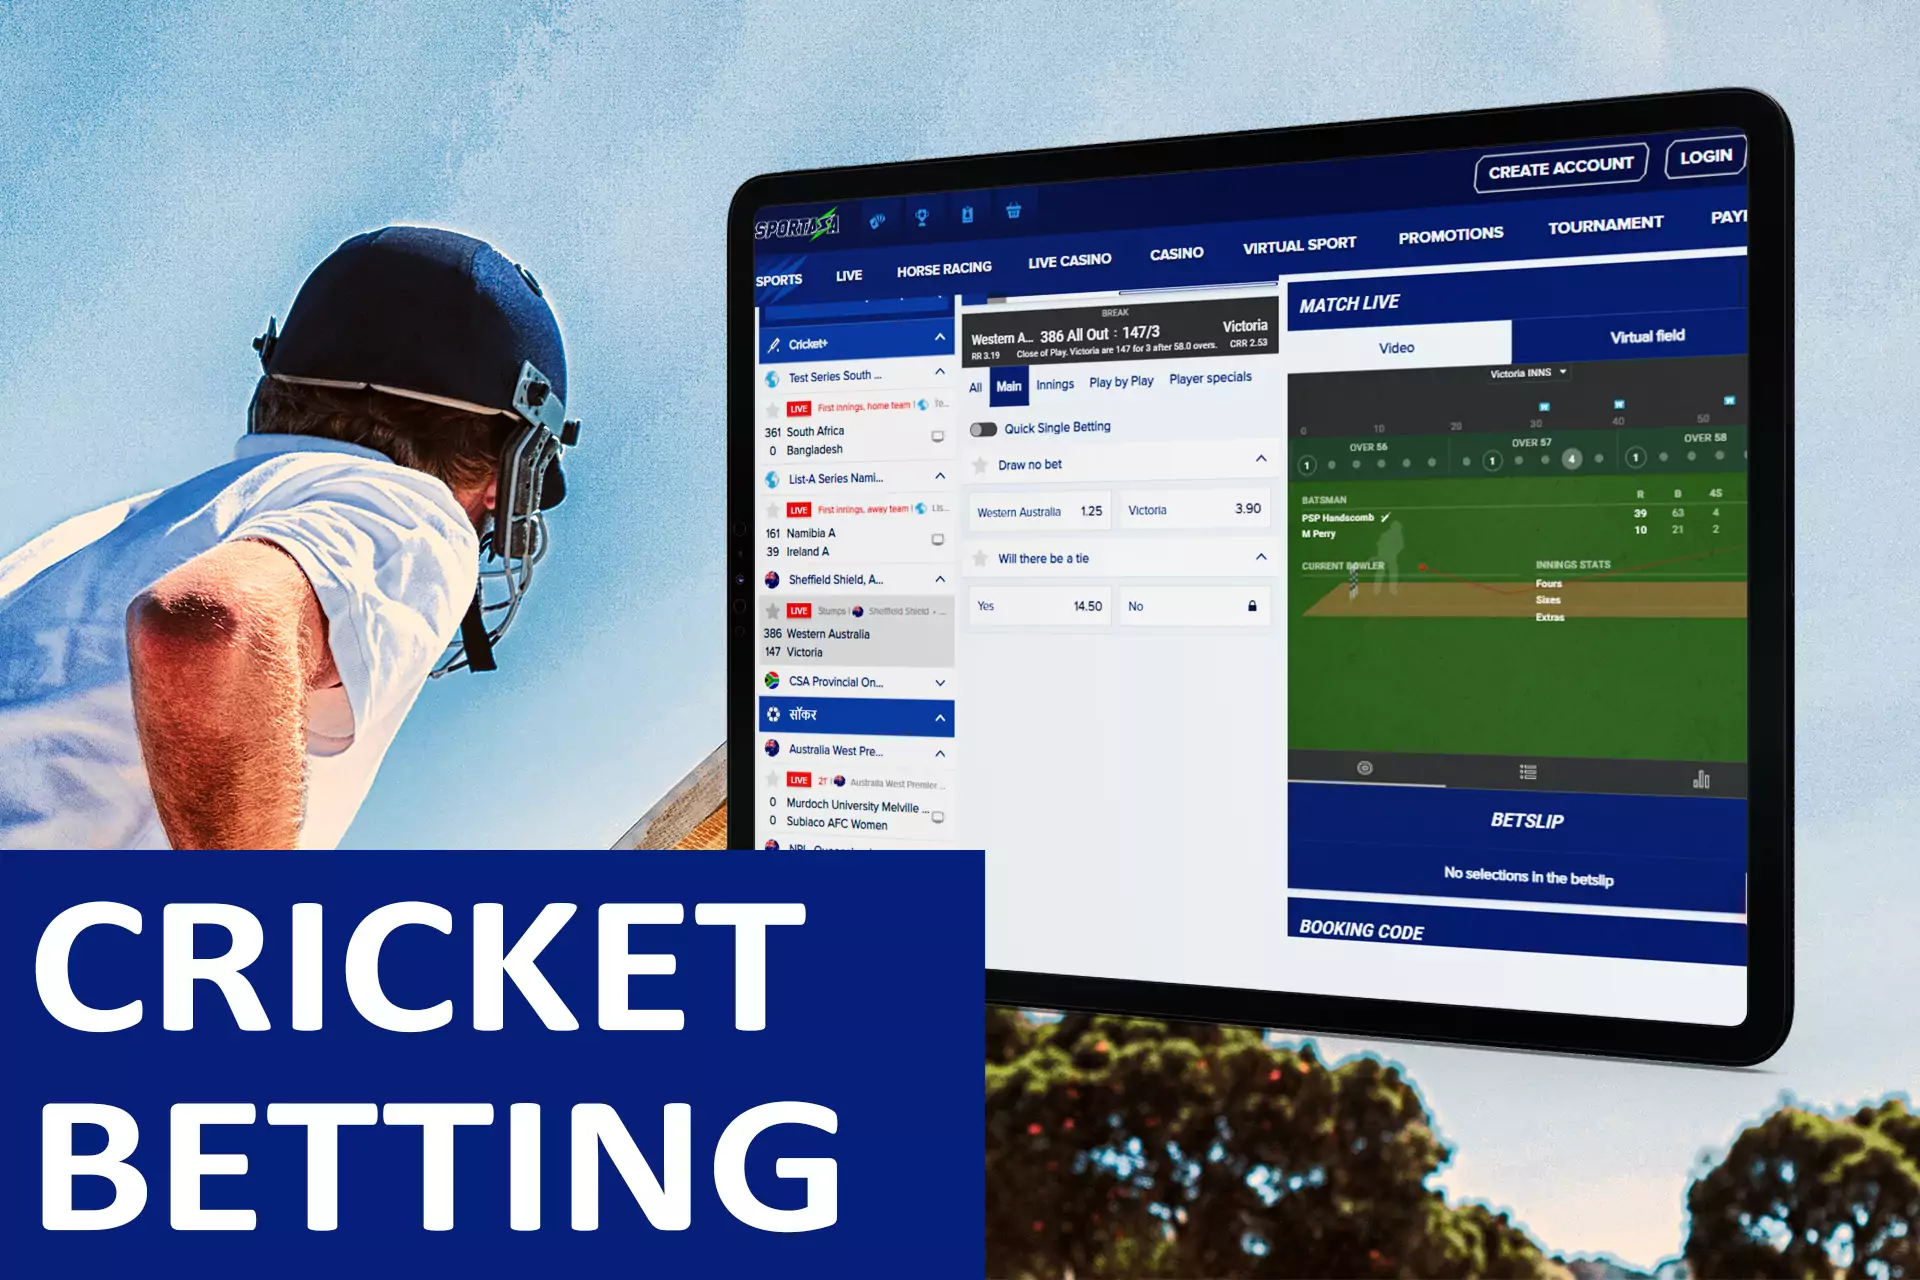 Sportaza offers cricket betting on its website.